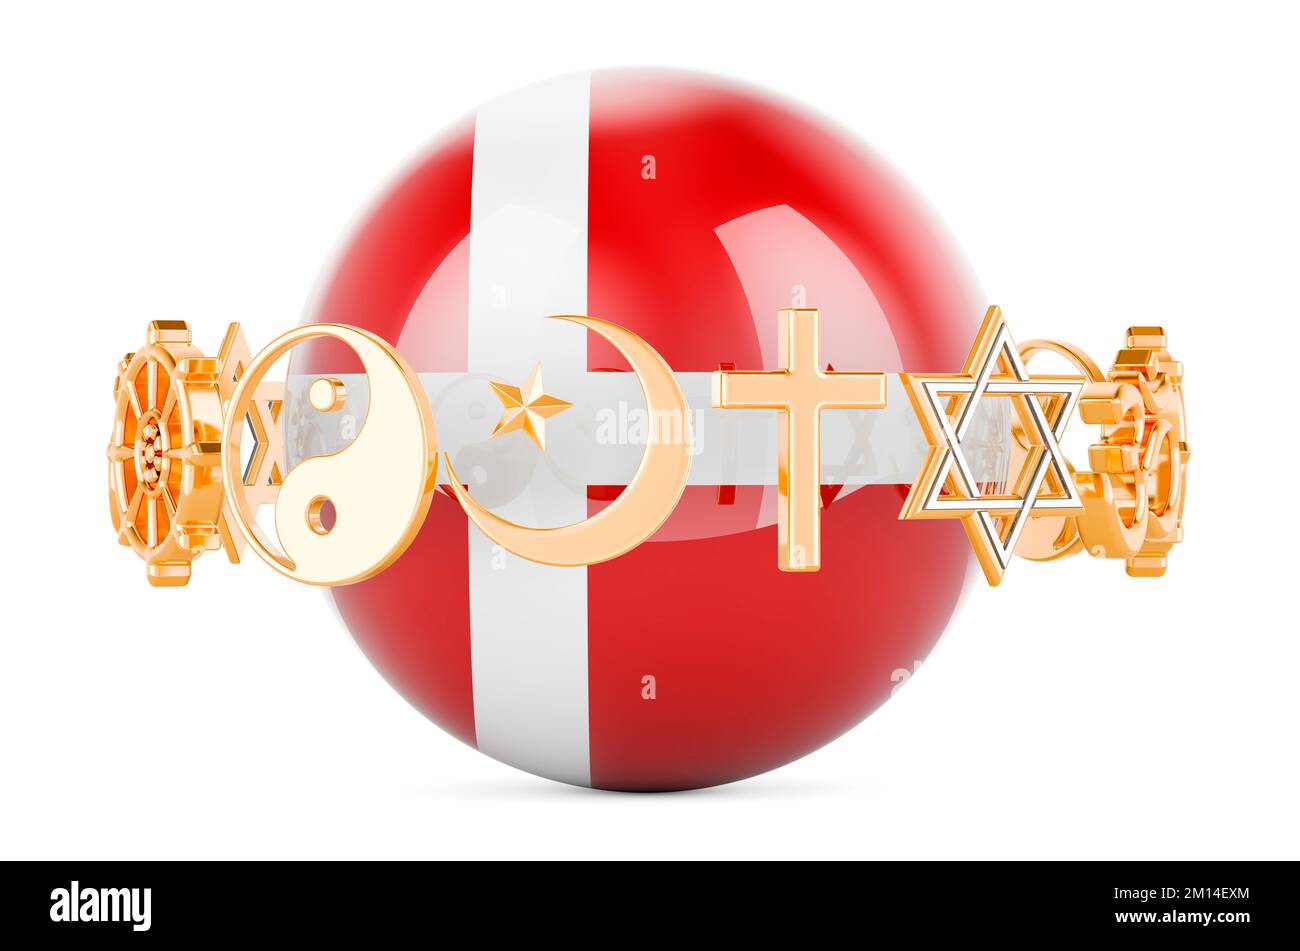 Danish flag painted on sphere with religions symbols around, 3D rendering isolated on white background Stock Photo